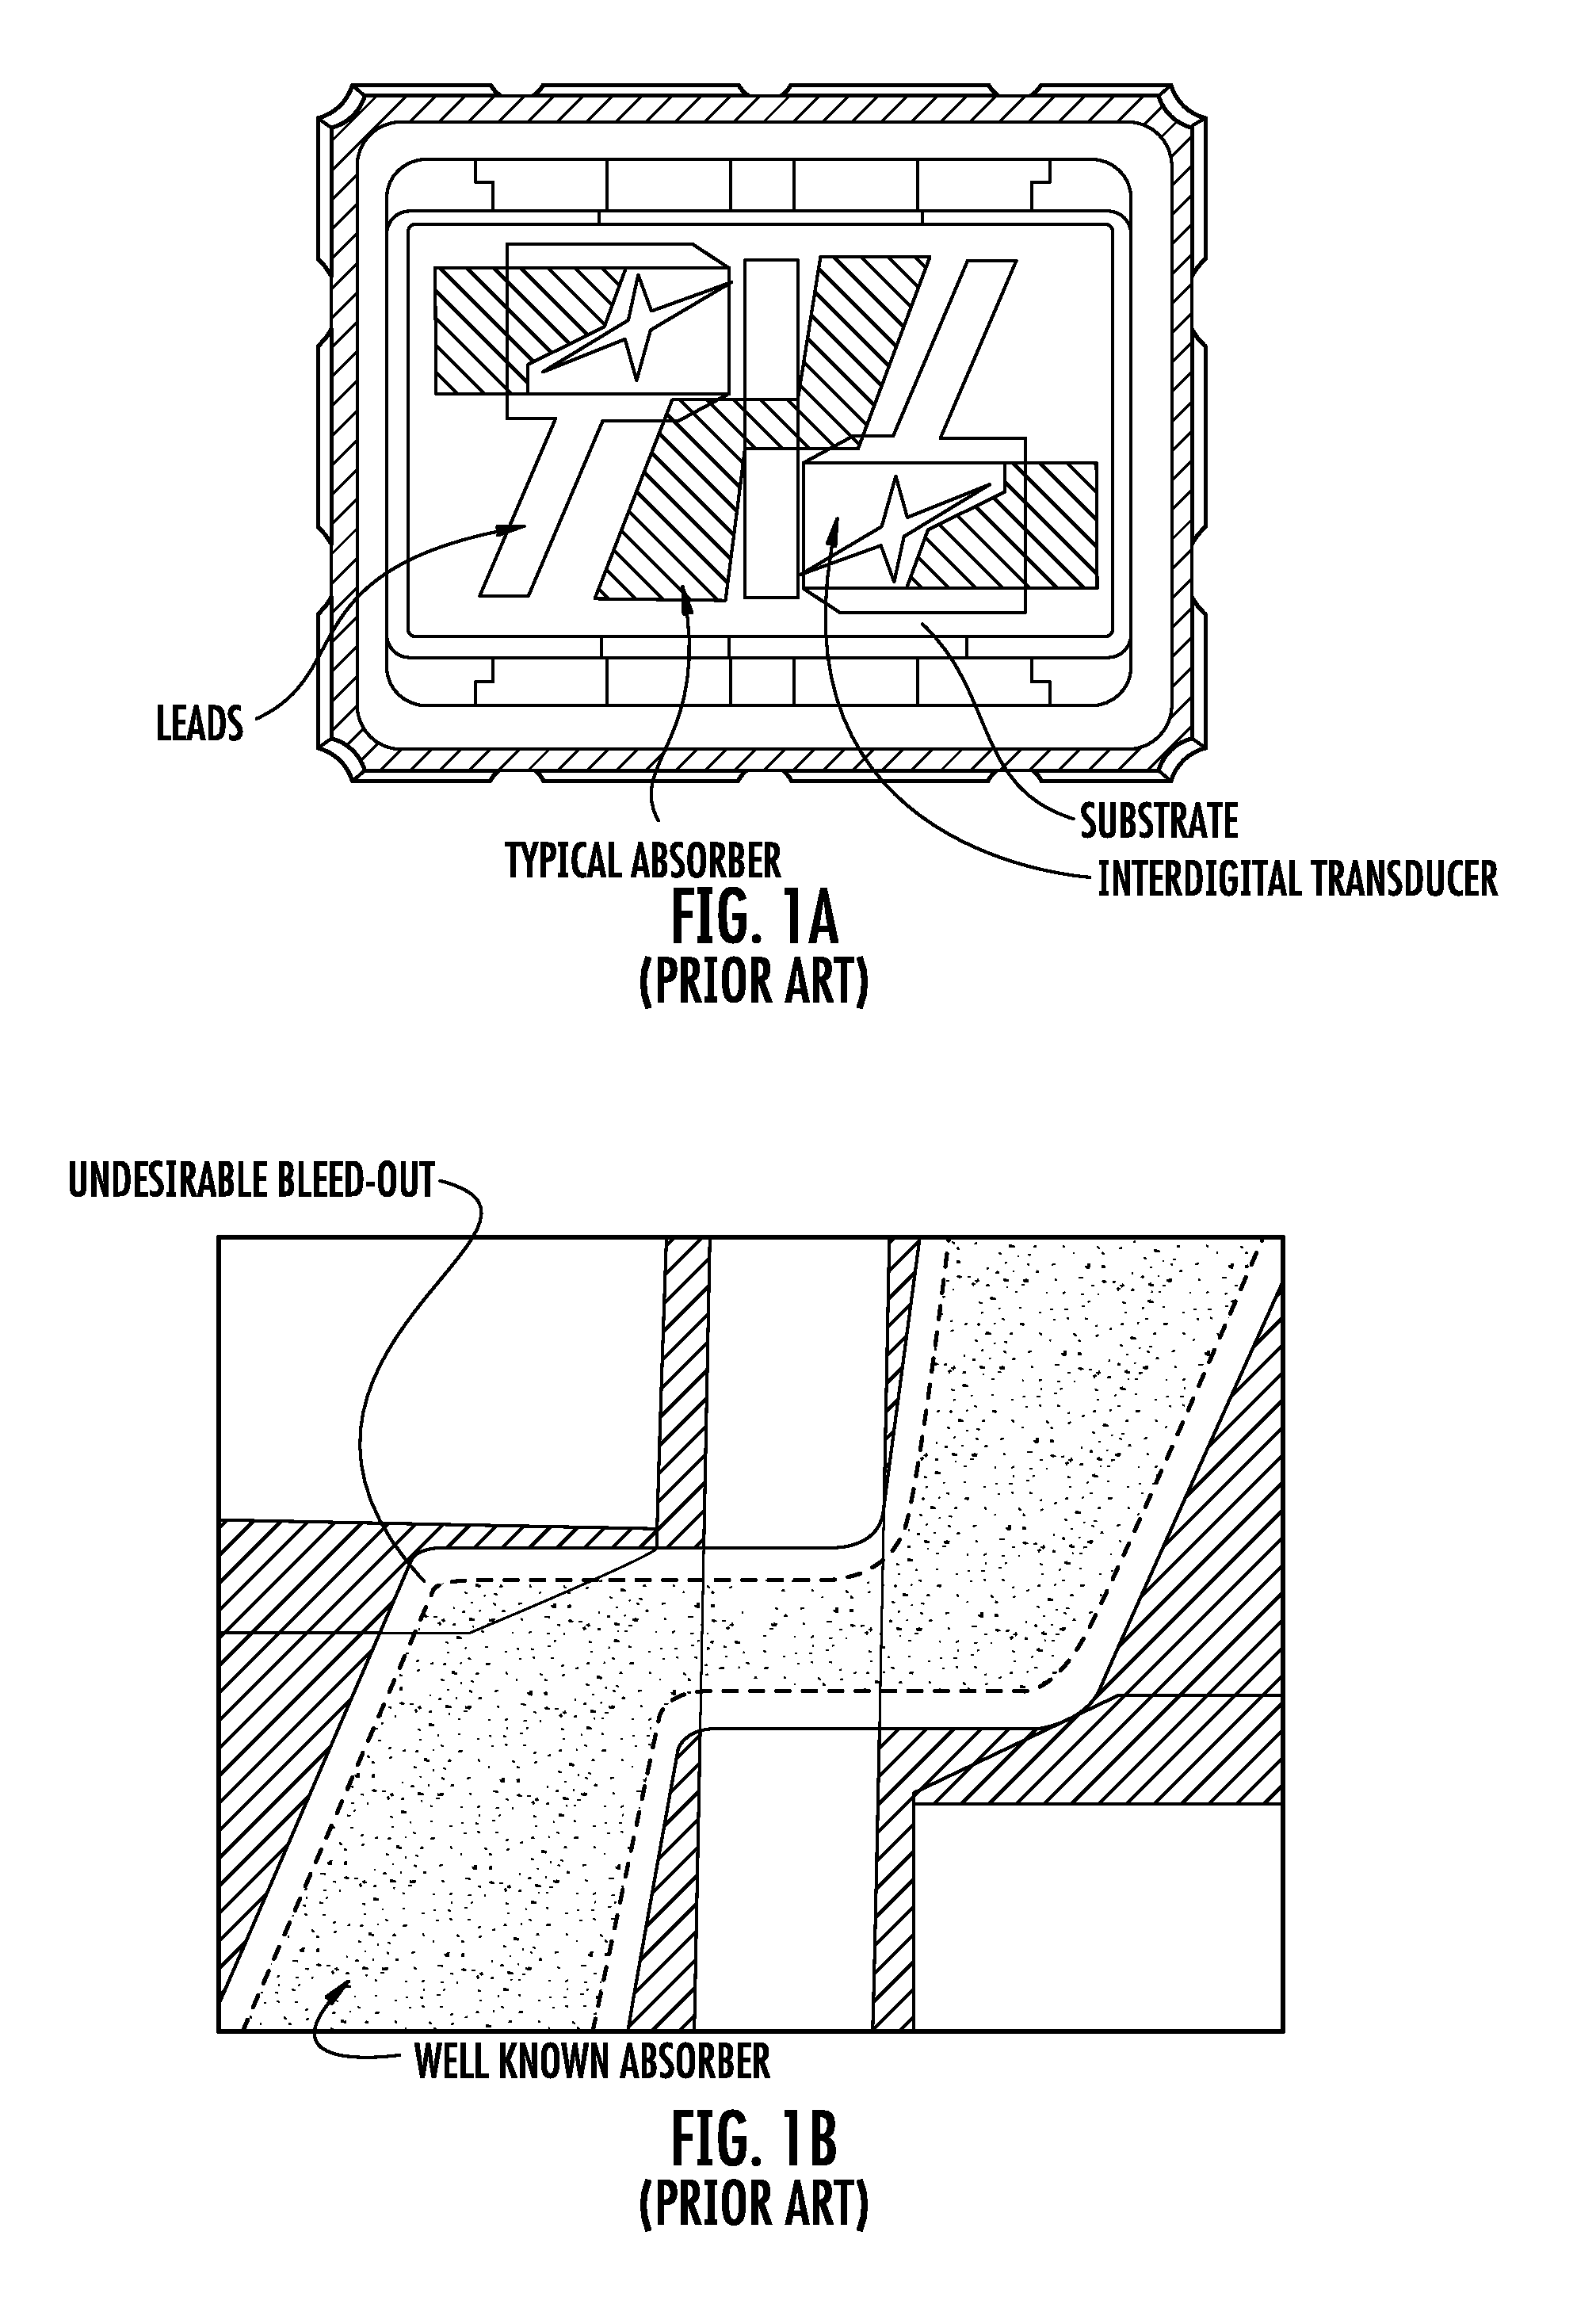 Acoustic wave filter manufacturing method using photo-definable epoxy for suppression of unwanted acoustic energy